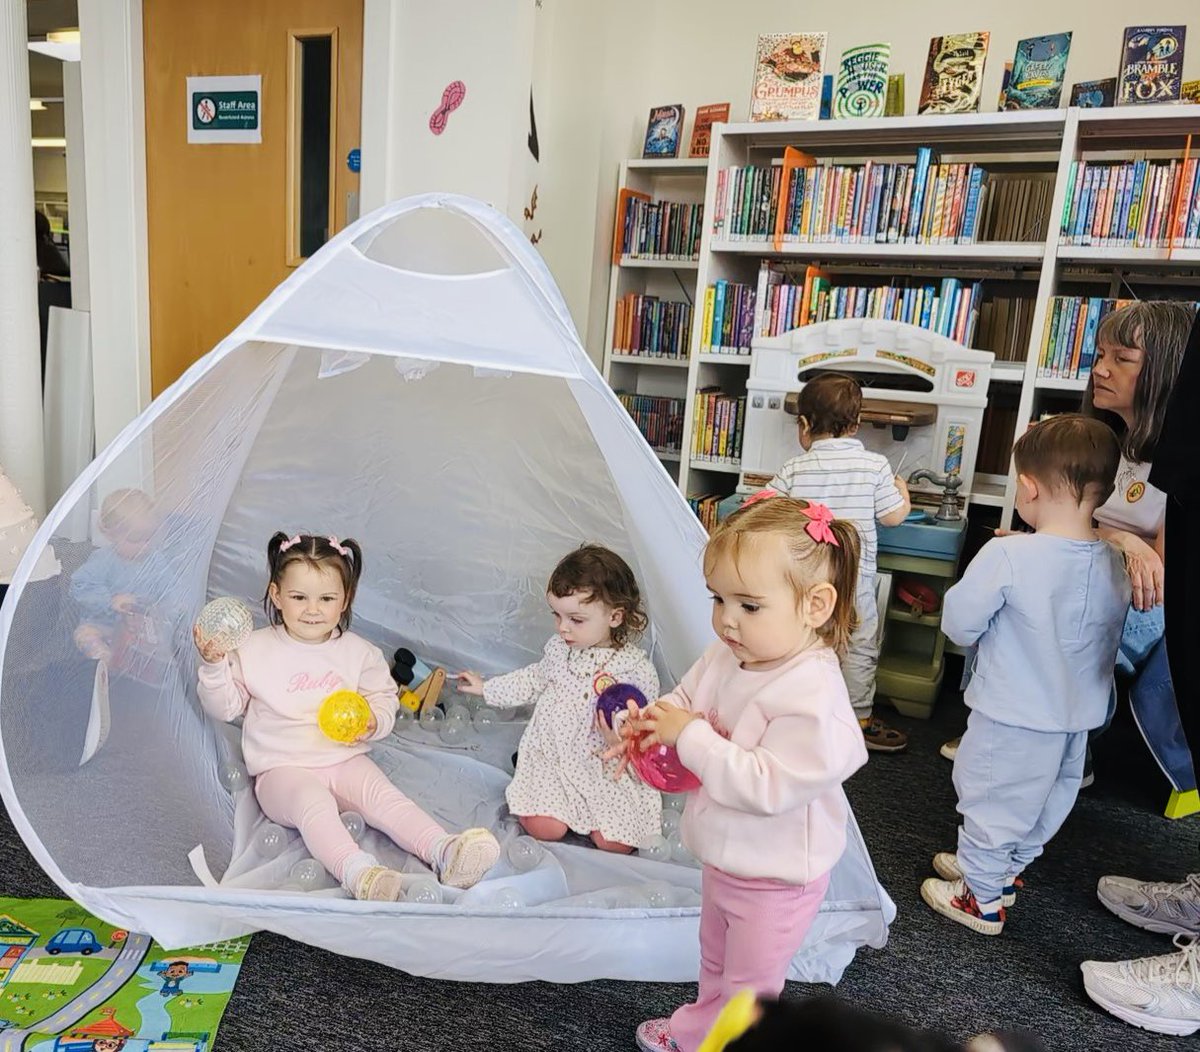 This Week is Bookbug Week. We had a fantastic Bookbug at Greenock Central Library this morning. Lots of grown ups and children stayed and played after the session. #BookbugWeek